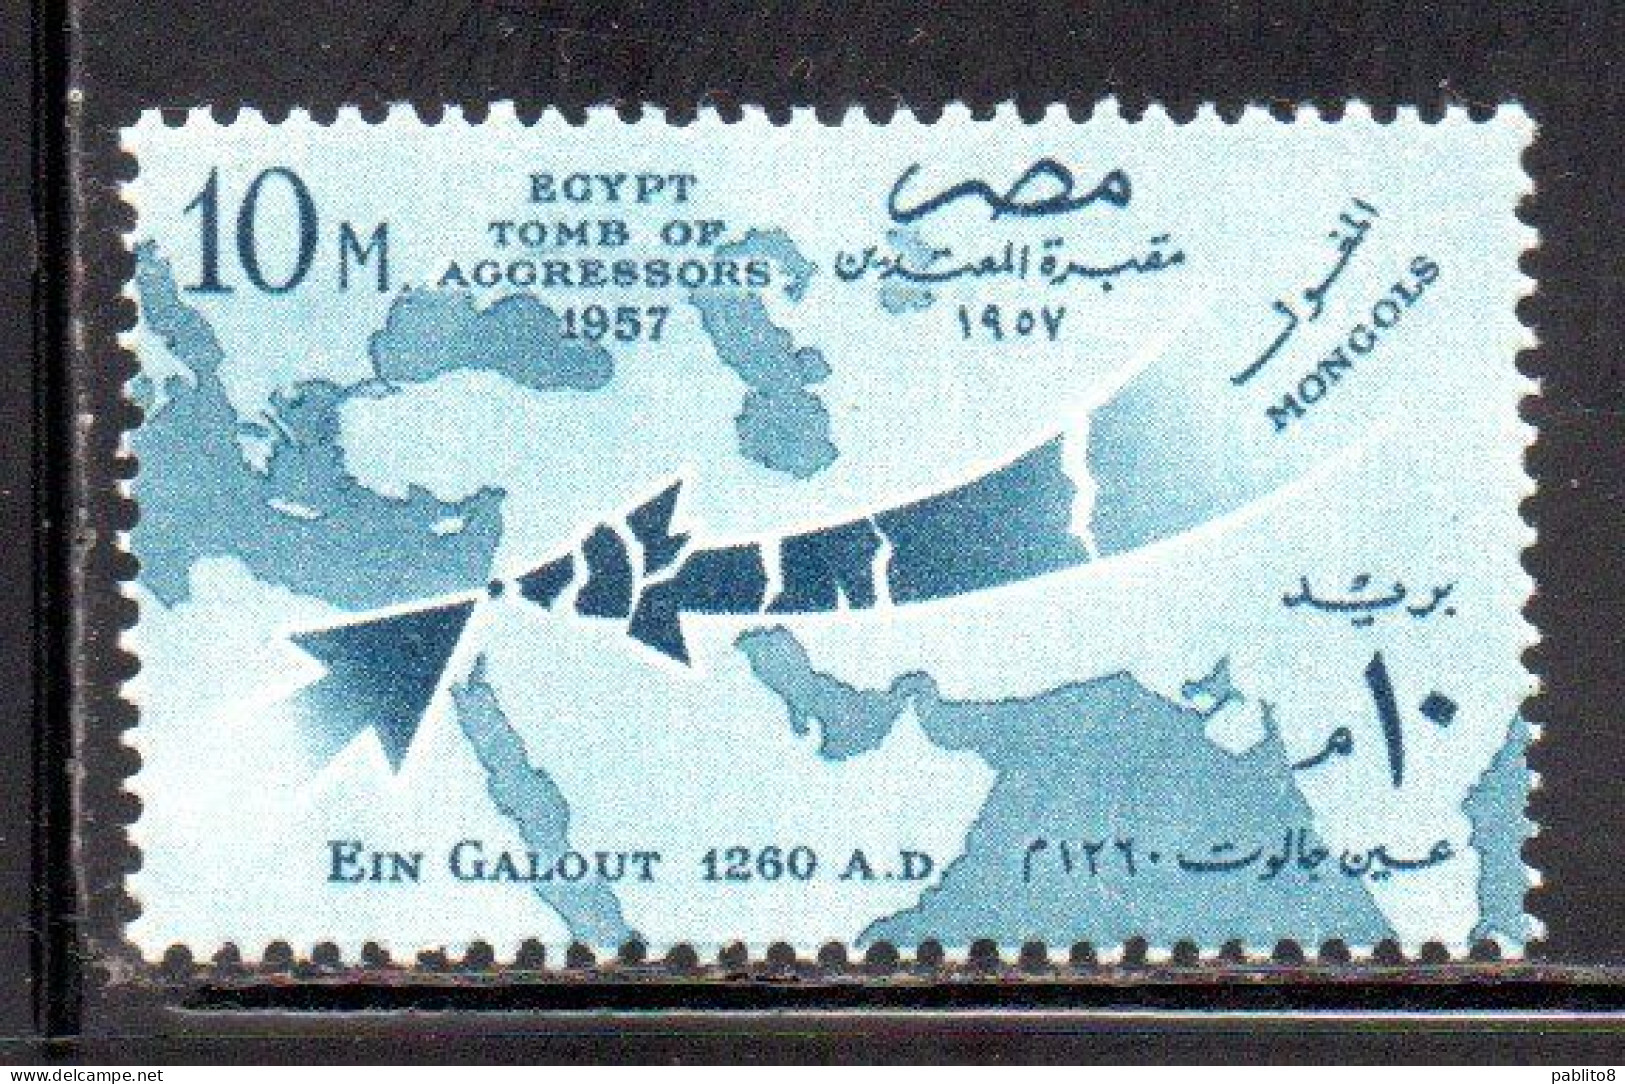 UAR EGYPT EGITTO 1957 TOMB OF AGGRESSORS 1957 MAP OF MIDDLE EAST EIN GALOUT 1260 10m MH - Unused Stamps